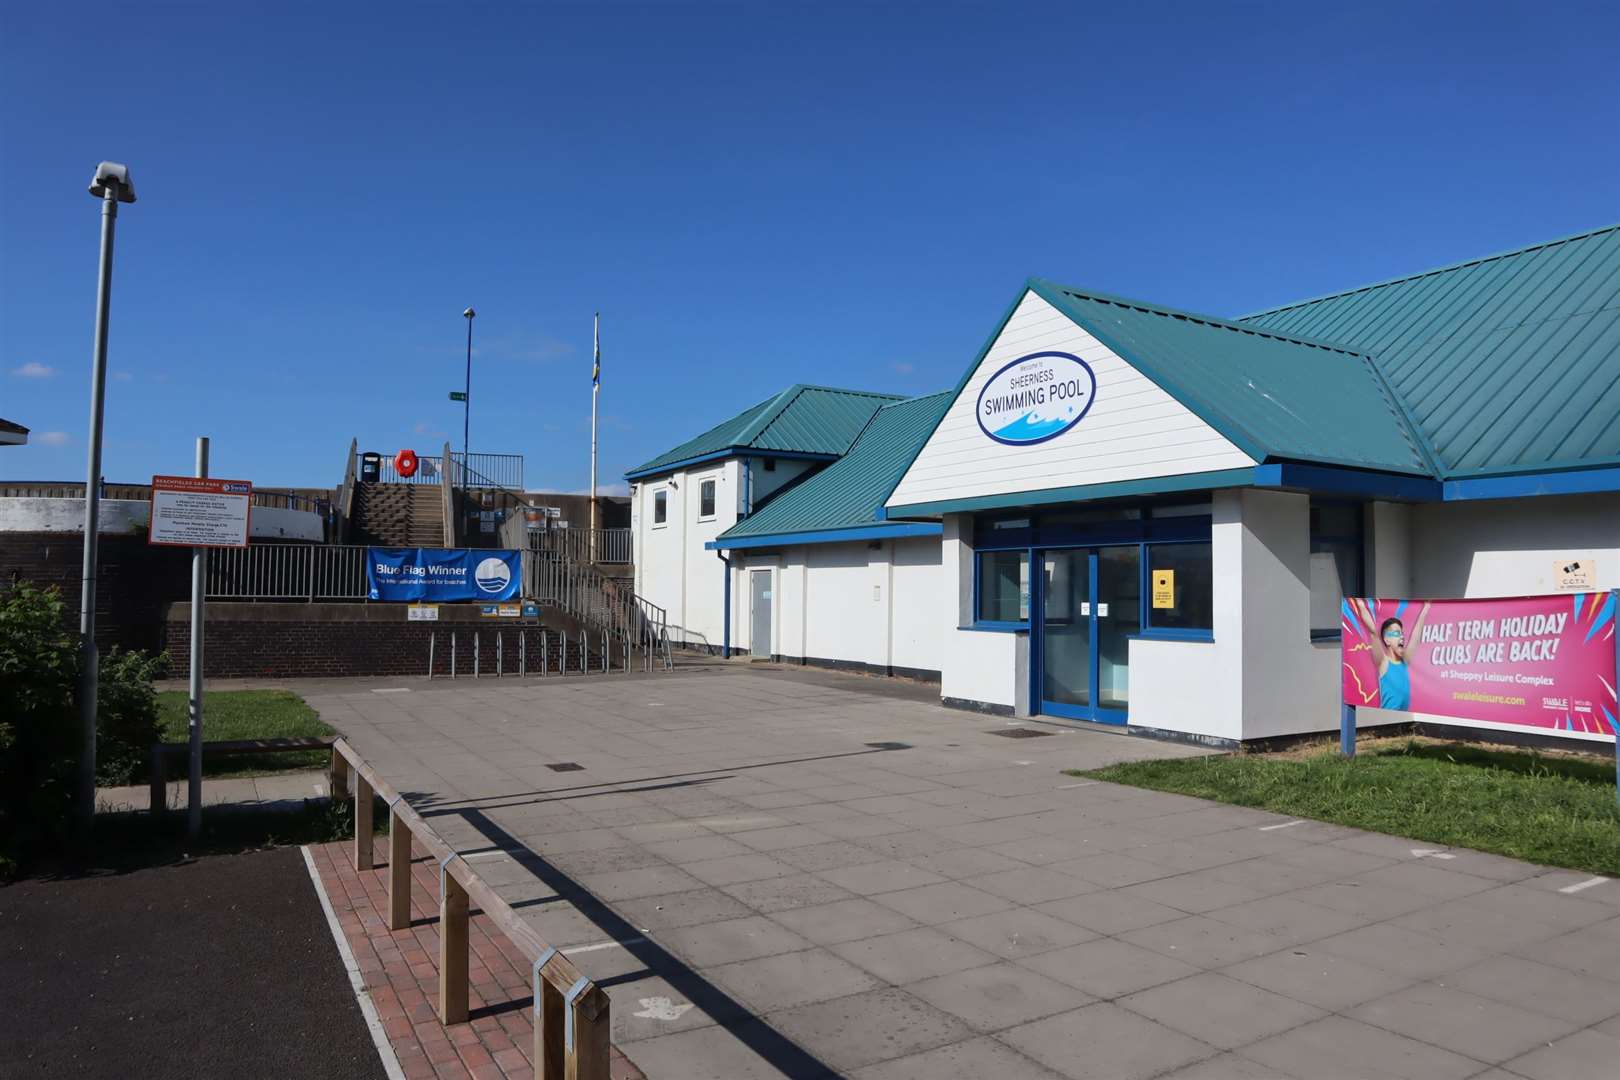 Sheppey Leisure Centre swimming pool on the seafront at Sheerness